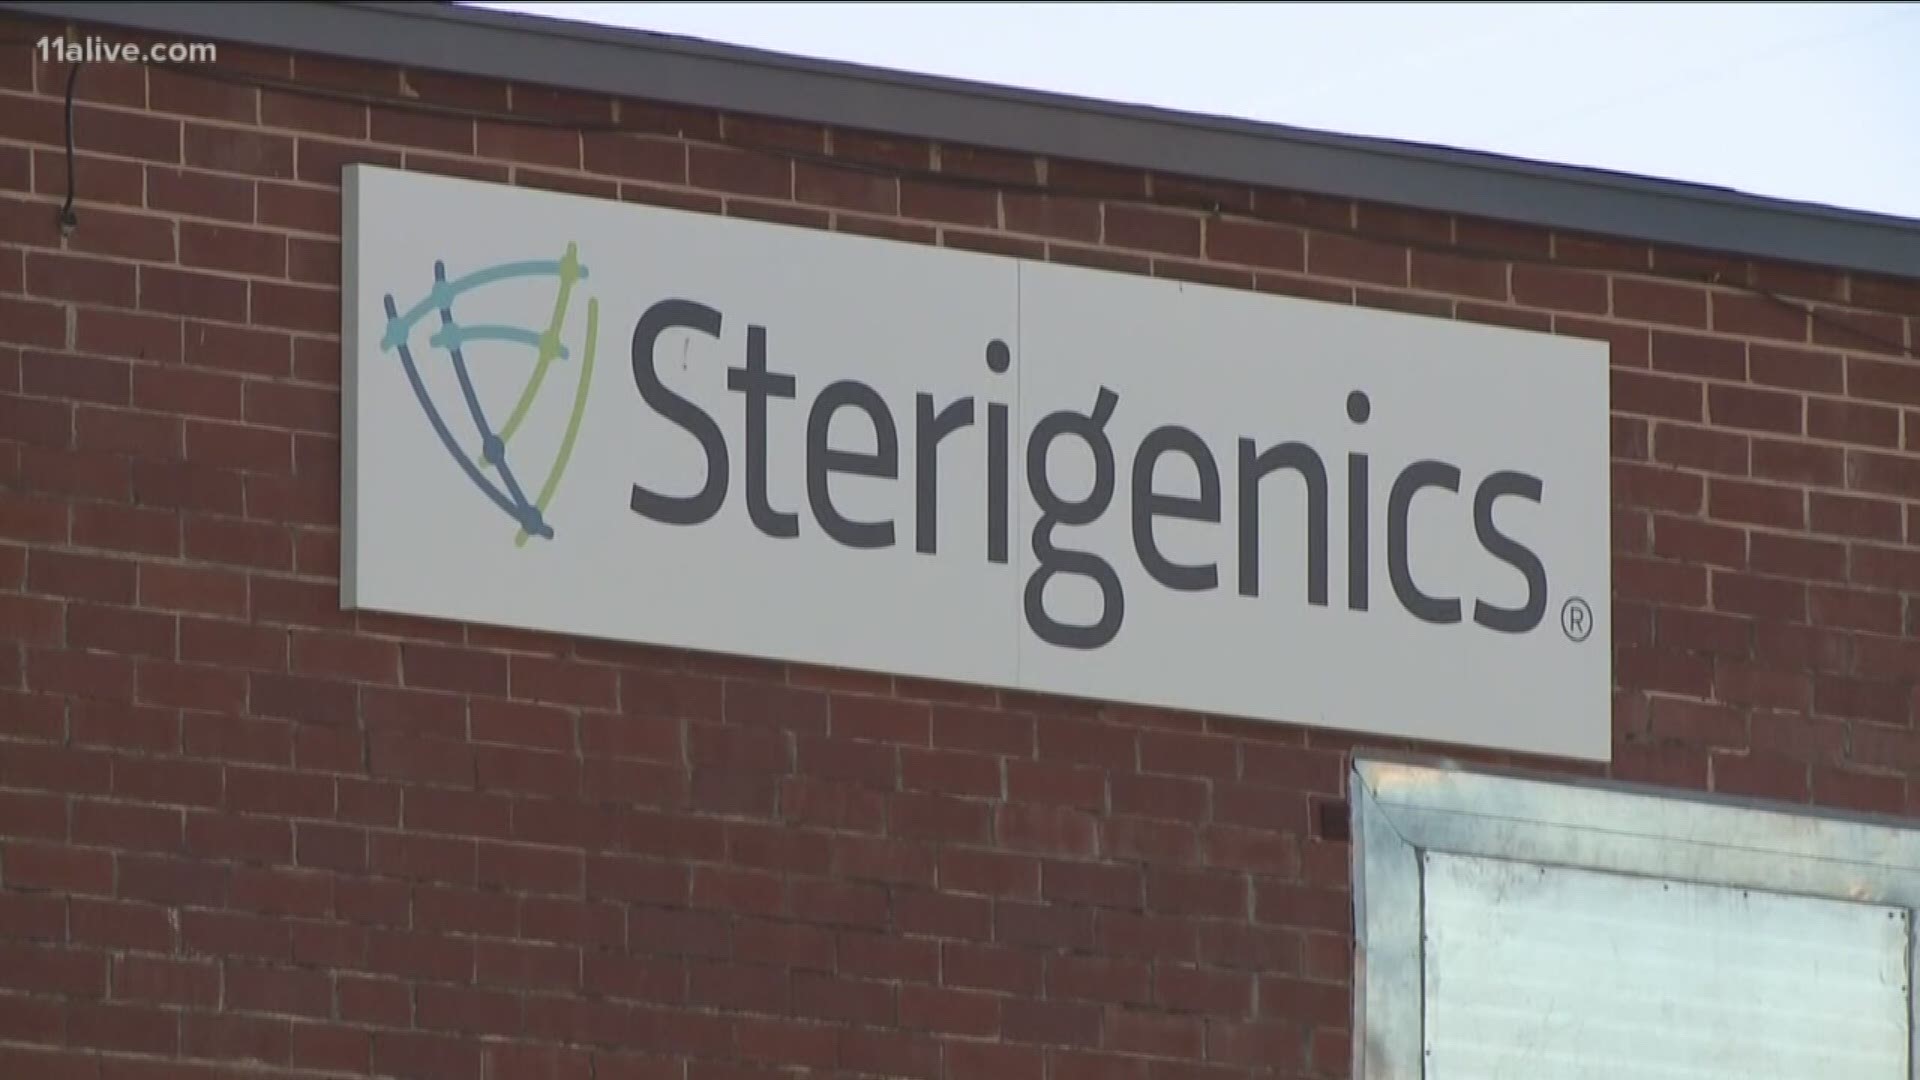 Sterigenics is being allowed to temporarily reopen to sterilize equipment during the pandemic. But, some worry it comes at another health cost.